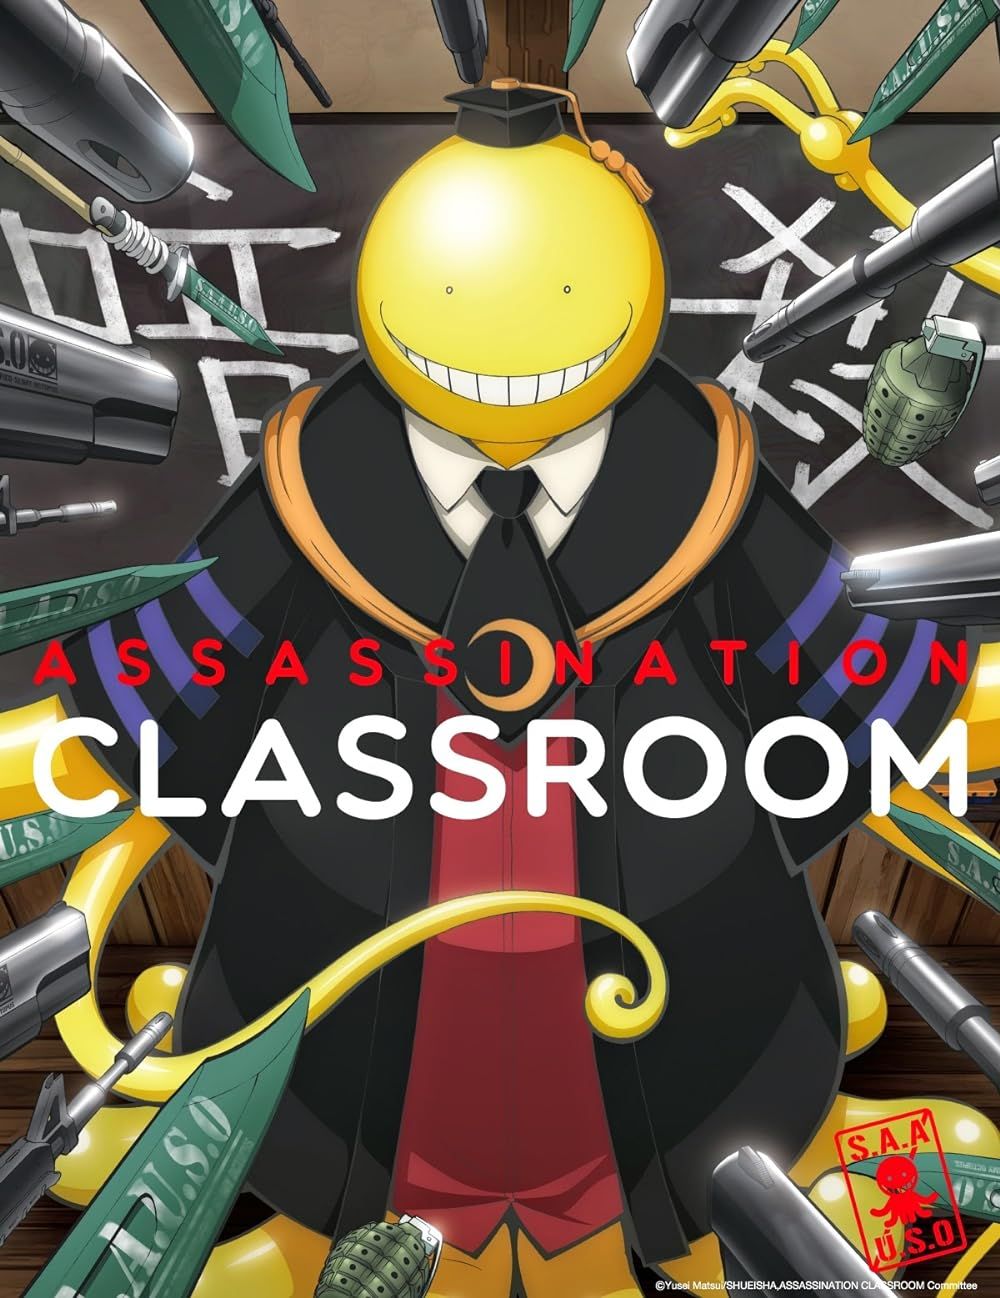 Koro-sensei surrounded by weapons in Assassination Classroom (2013) anime series poster